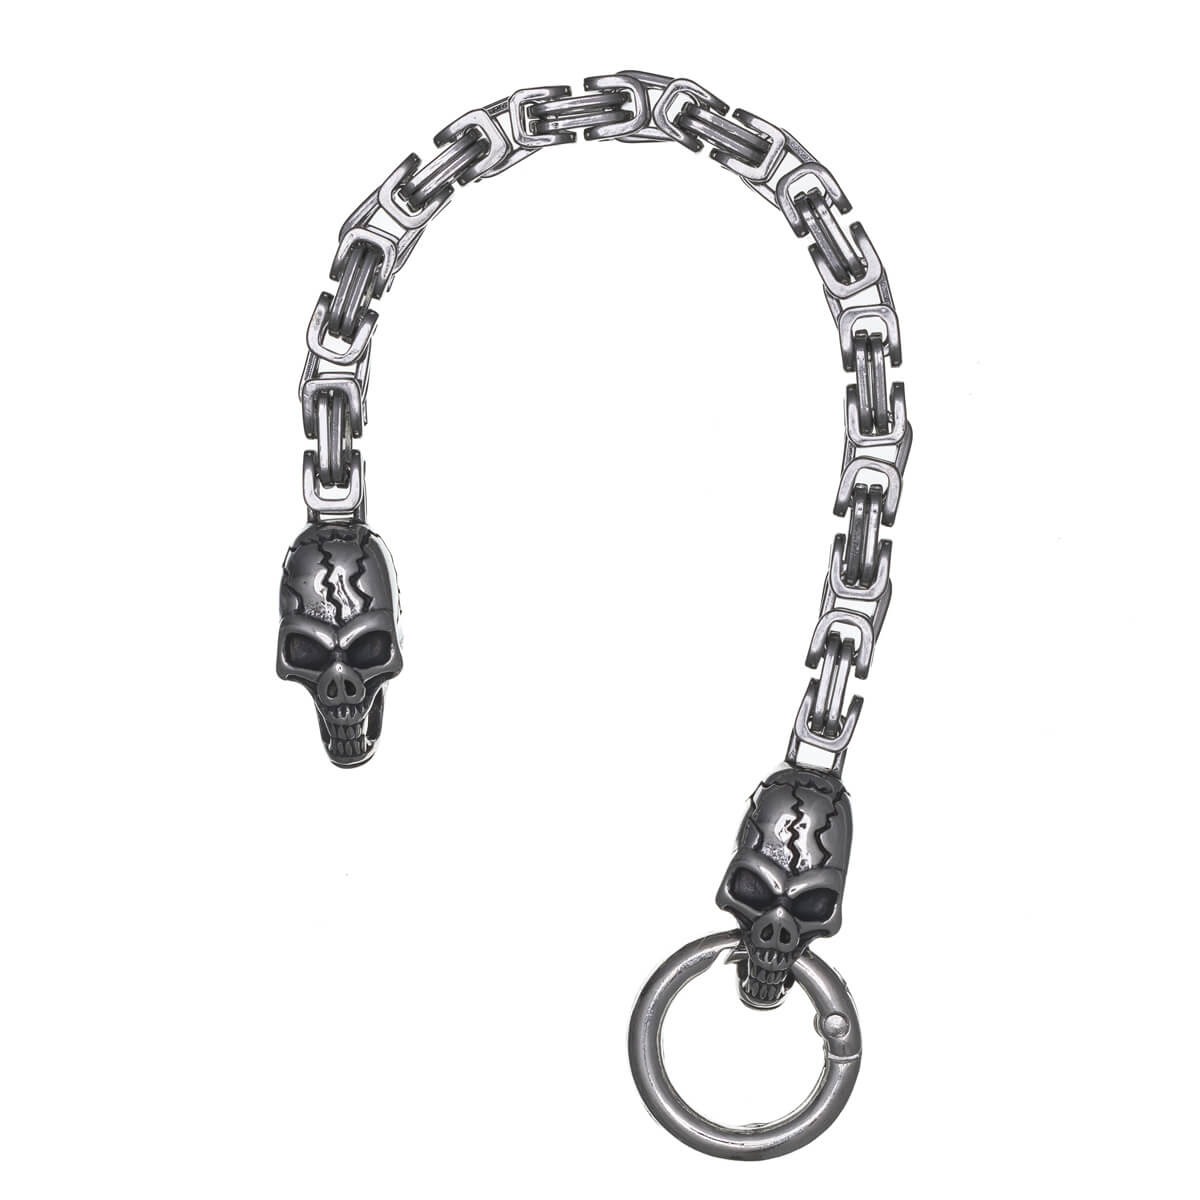 Steel skull key chain with quick release (Steel 316L)